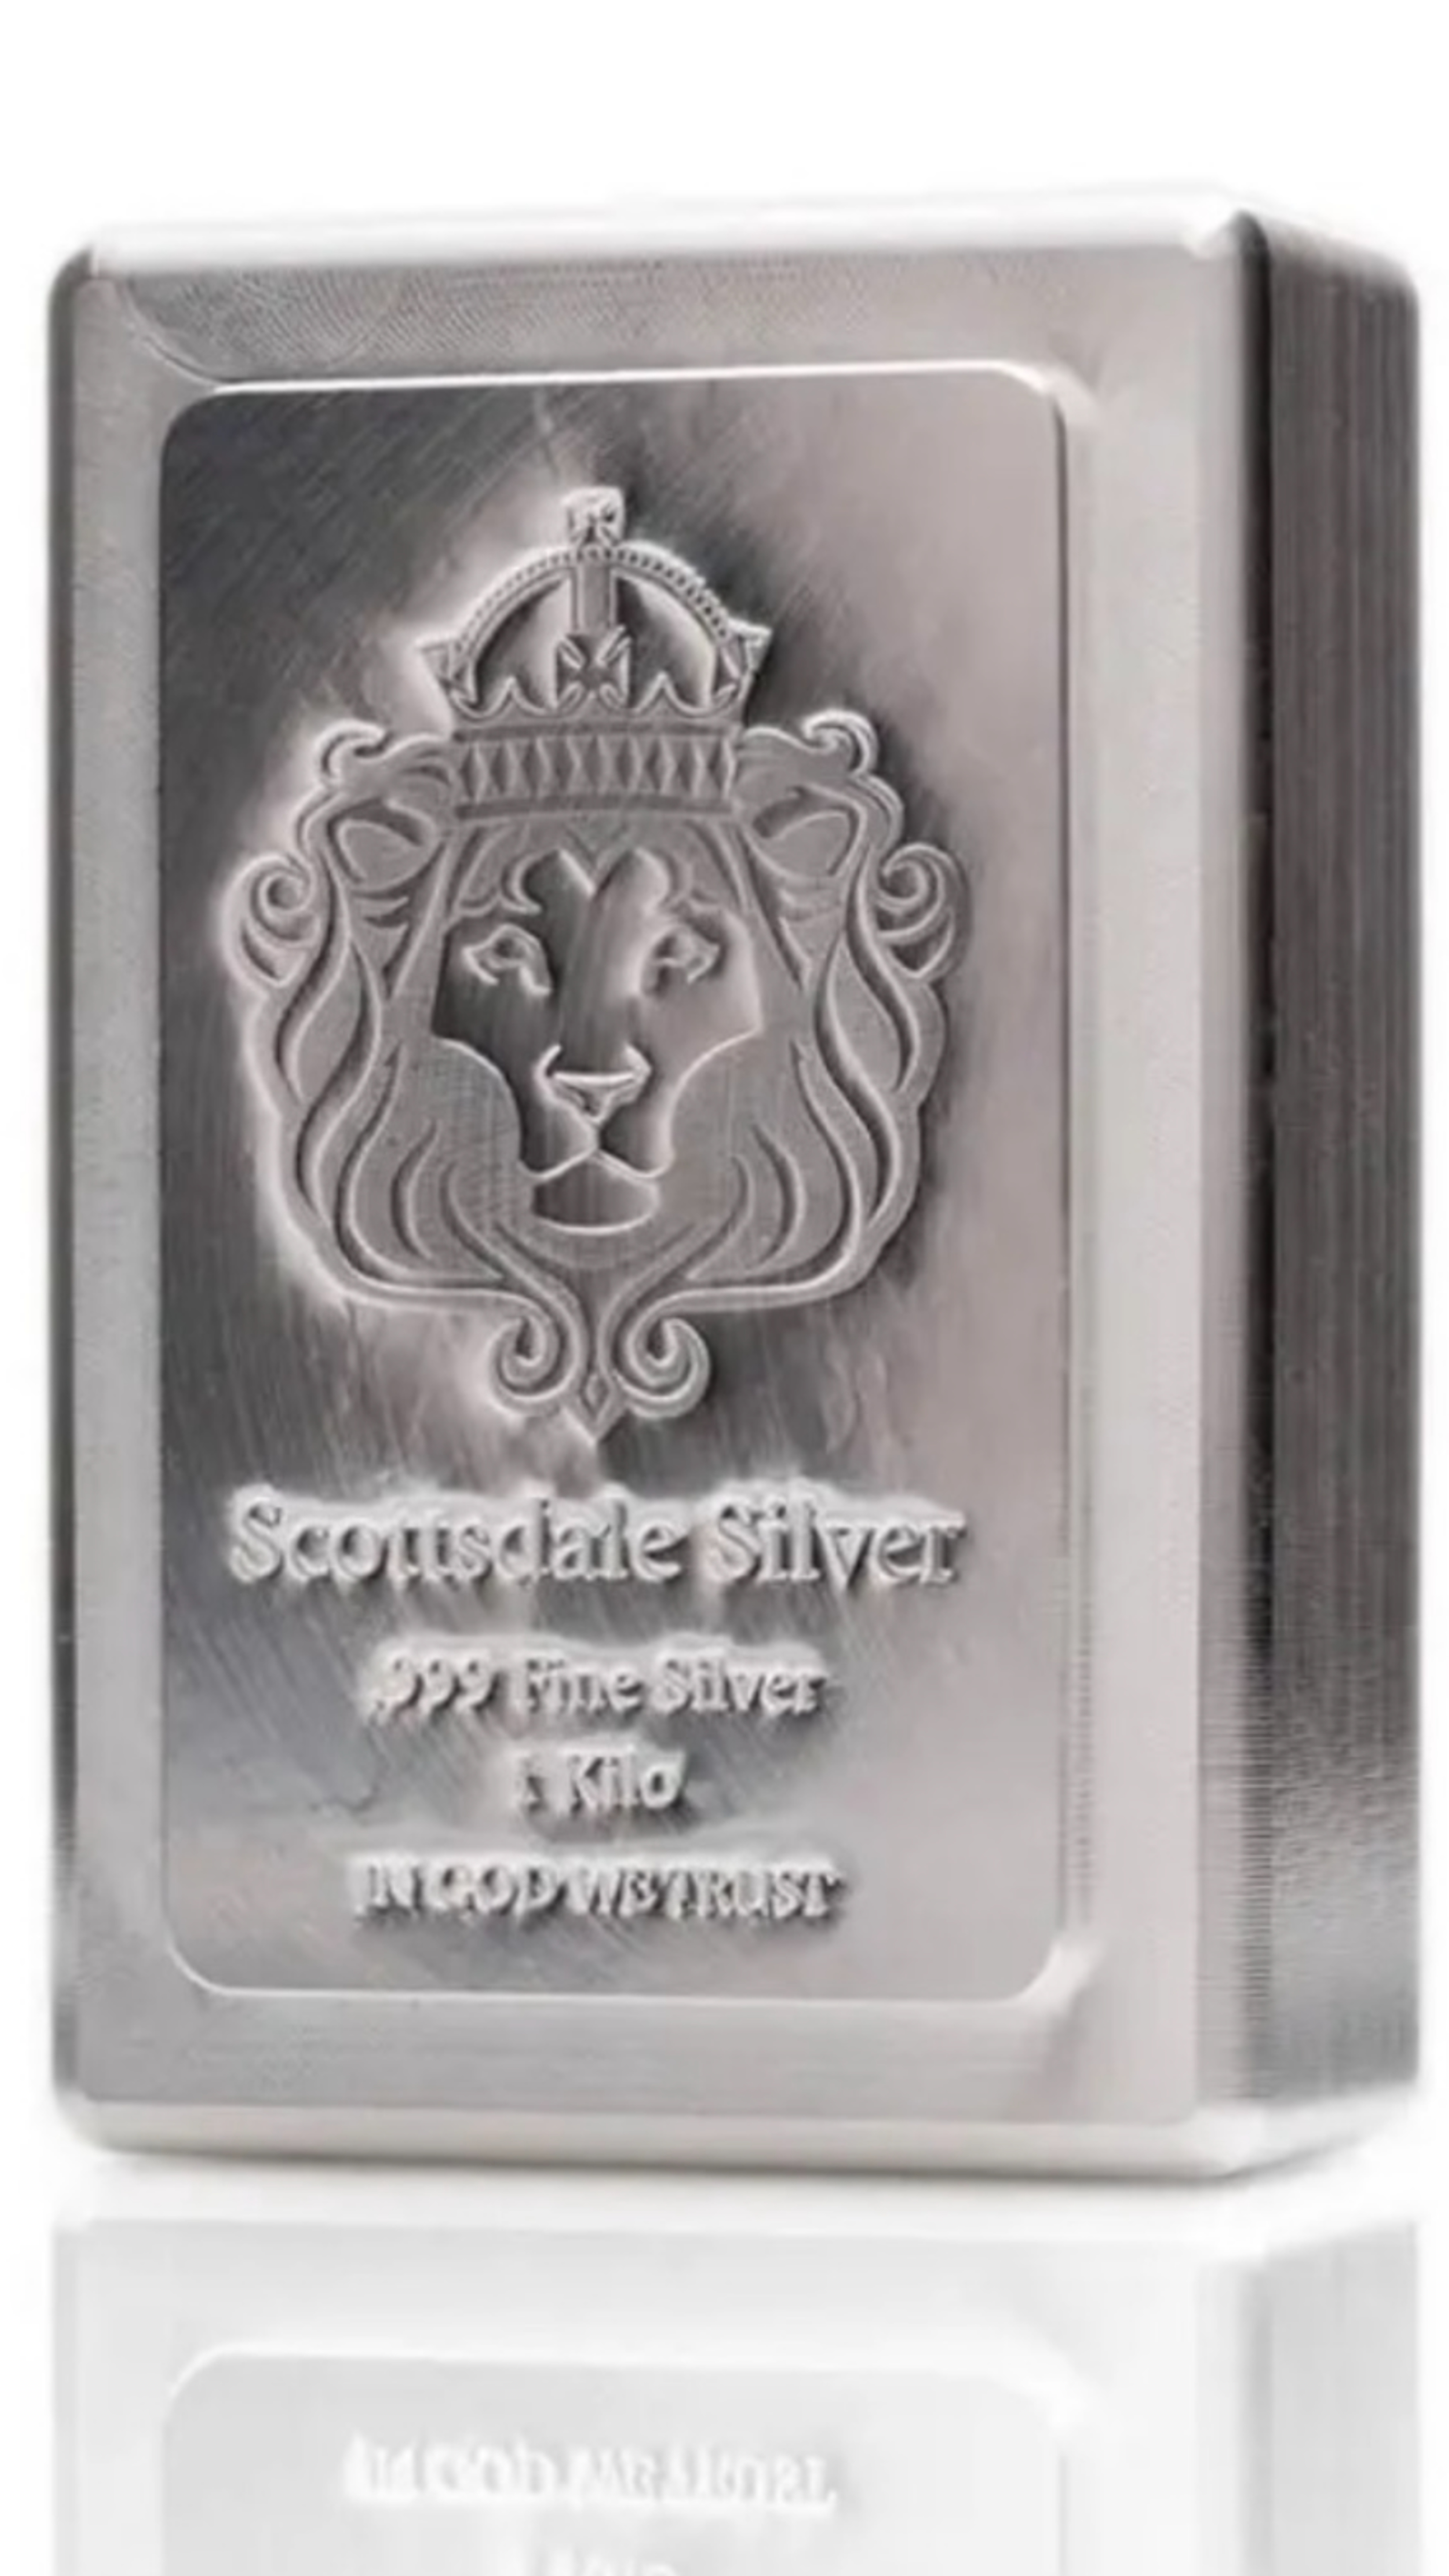 Preview image for the show titled "Mystery Wheel - ONE KILO PURE SILVER BAR!!!! $1000 bar!!! " at Today @ 12:10 AM